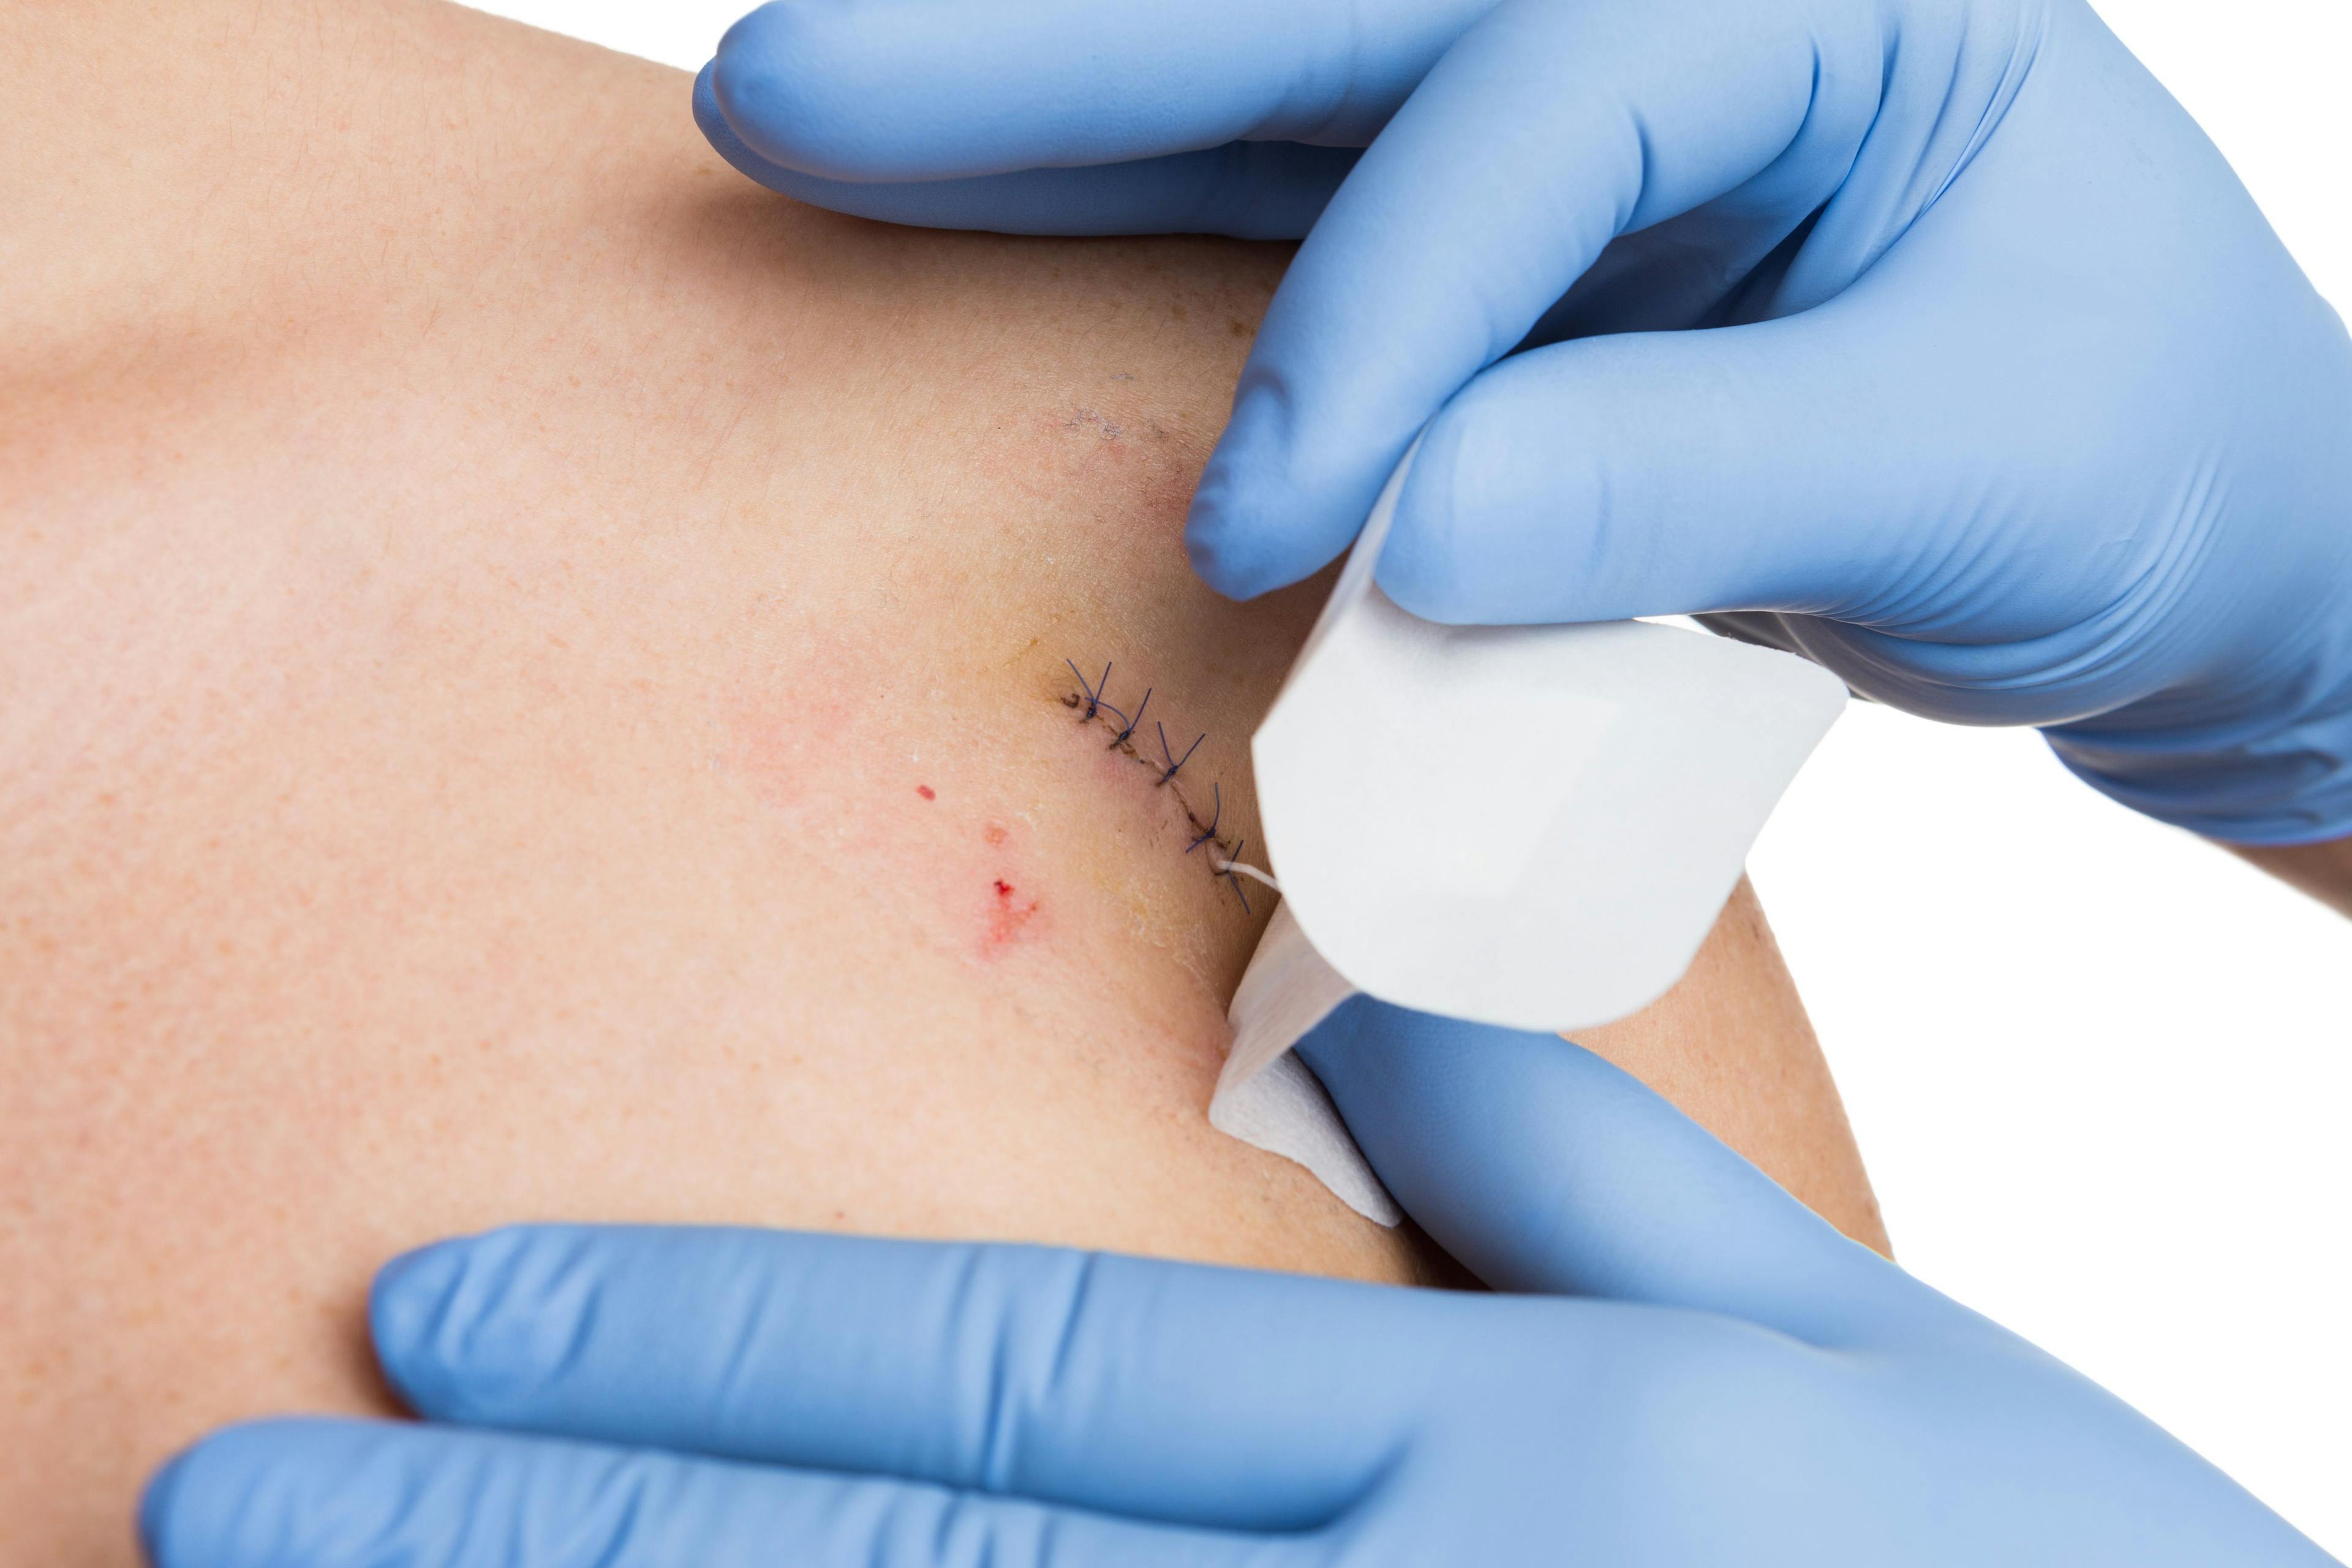 Xkin Suture Device Acts as Effective Wound Closure Method, Improves Scar Outcomes